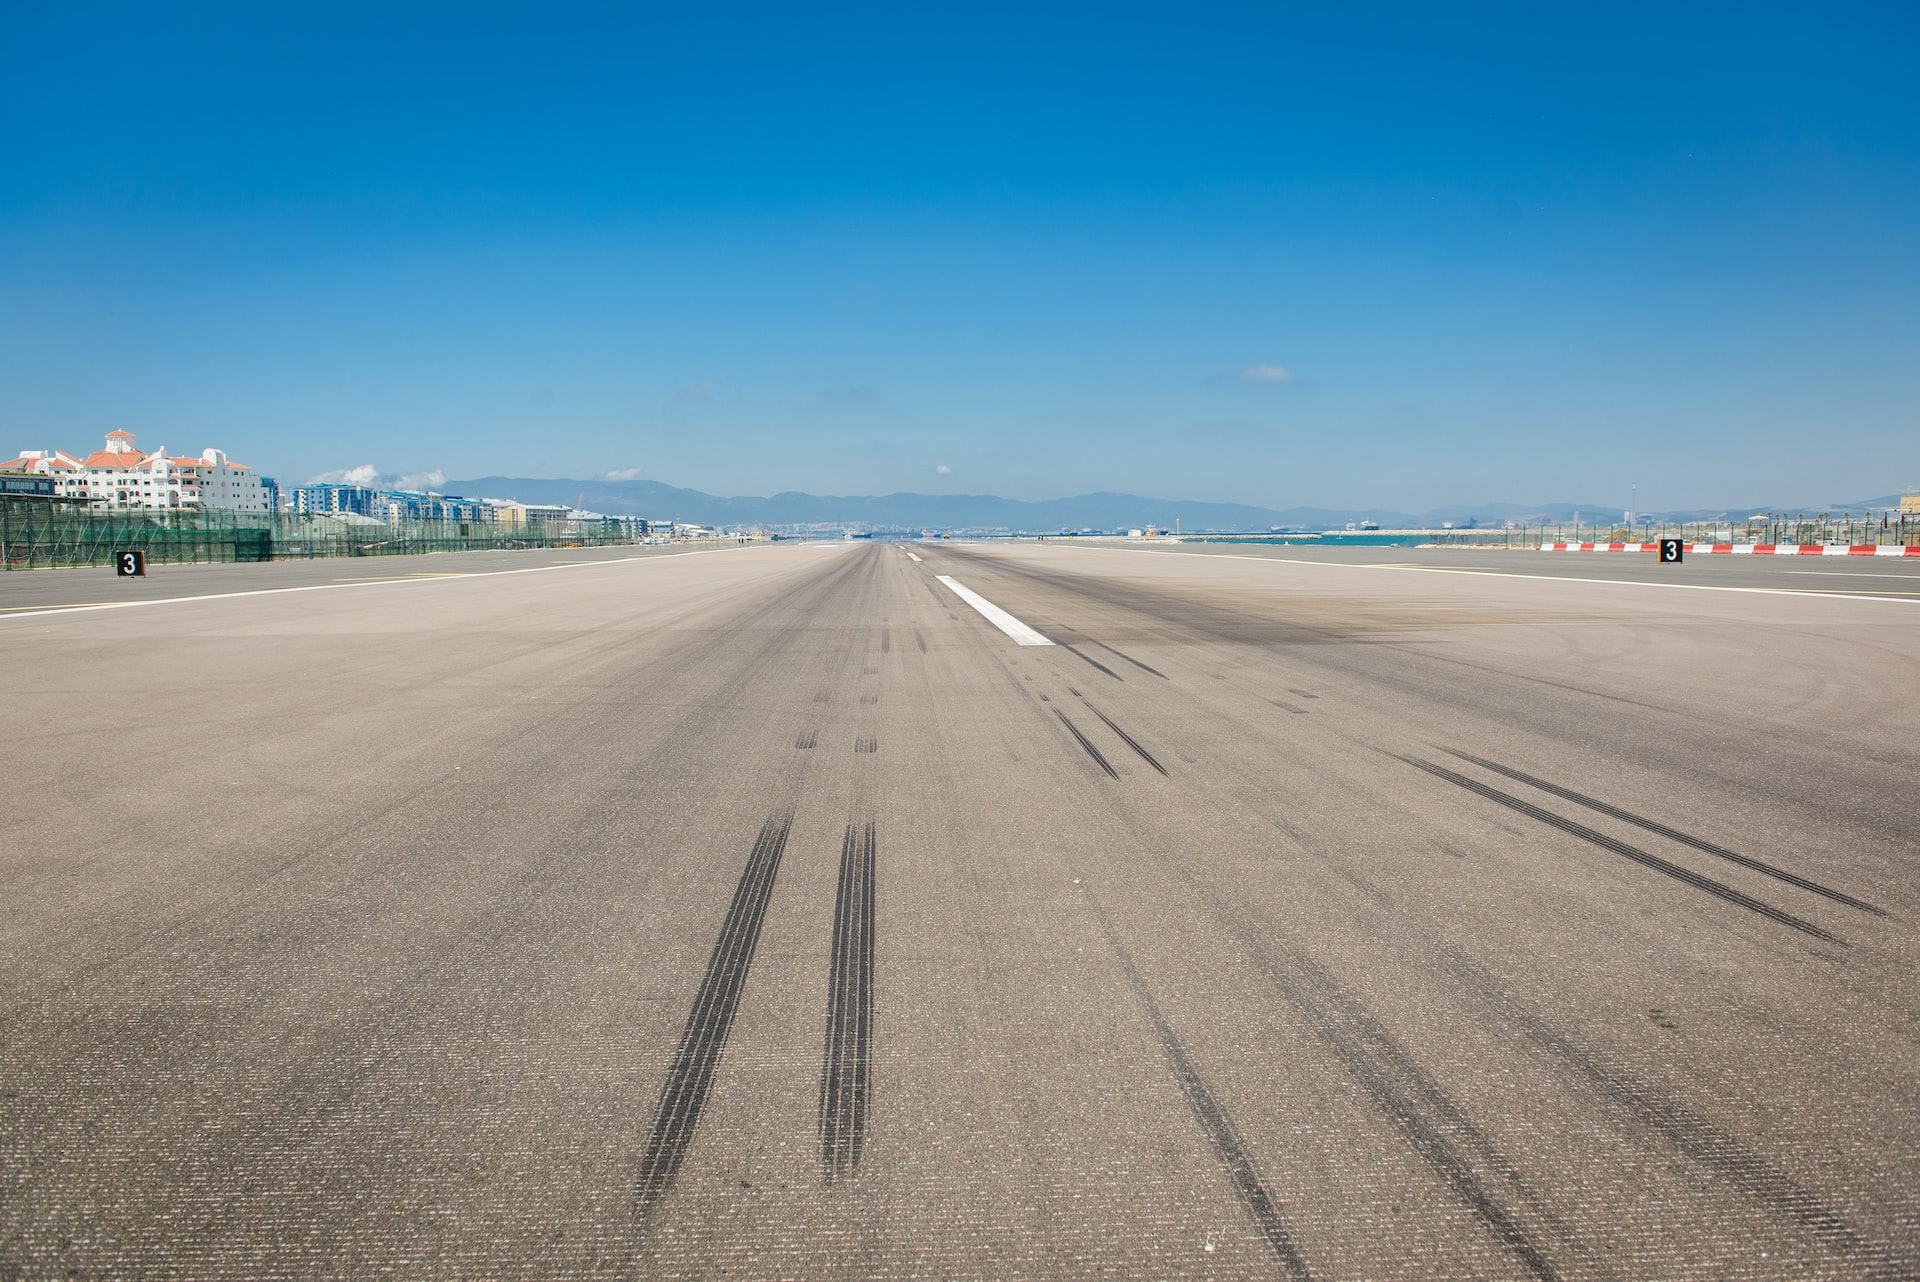 A runway of the airport in Gibraltar.